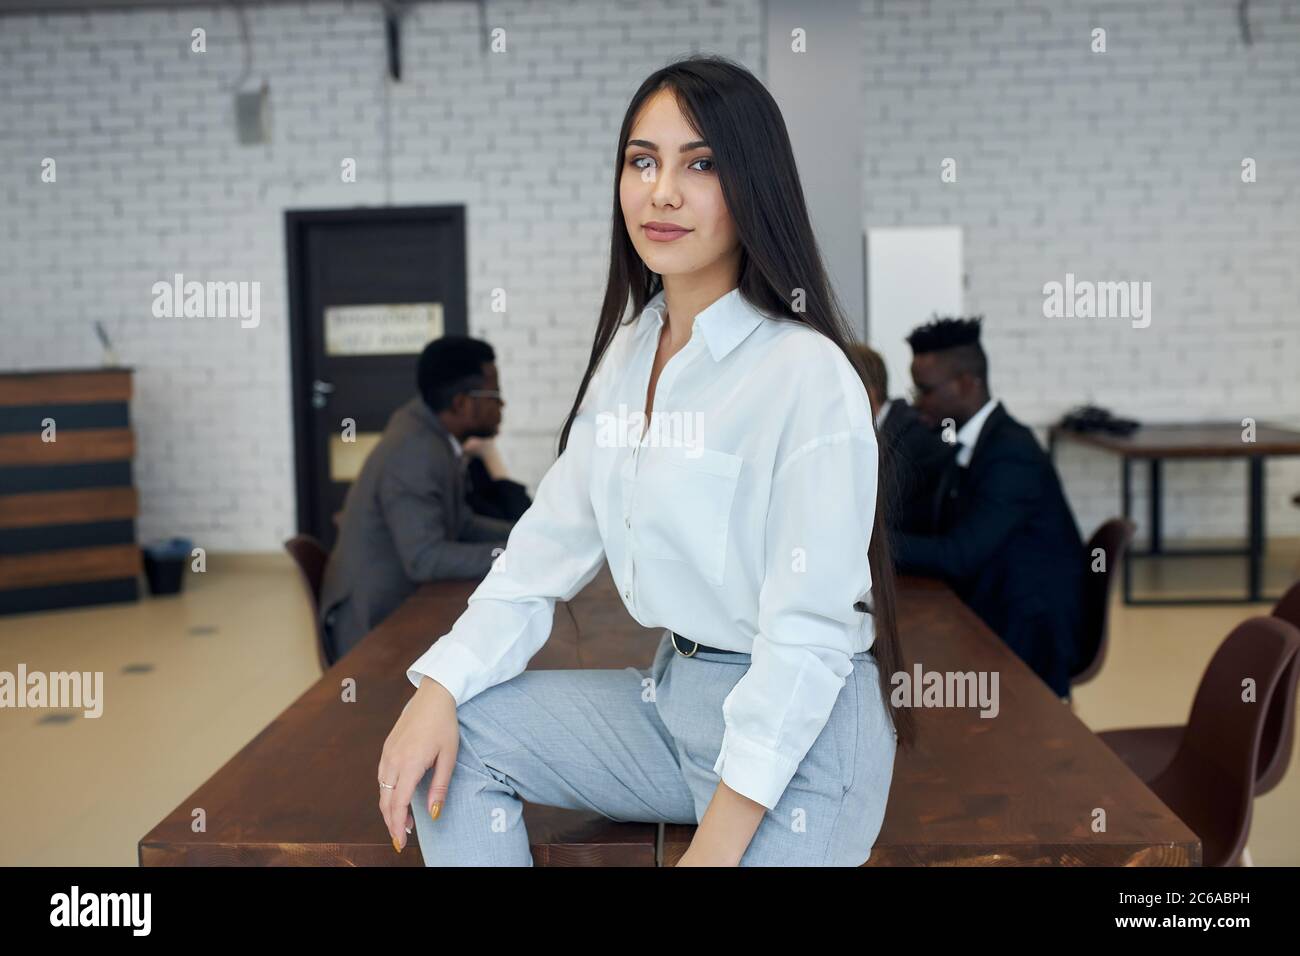 Cute young woman wearing white formal shirt sit on table in office, confidently looking at camera Stock Photo